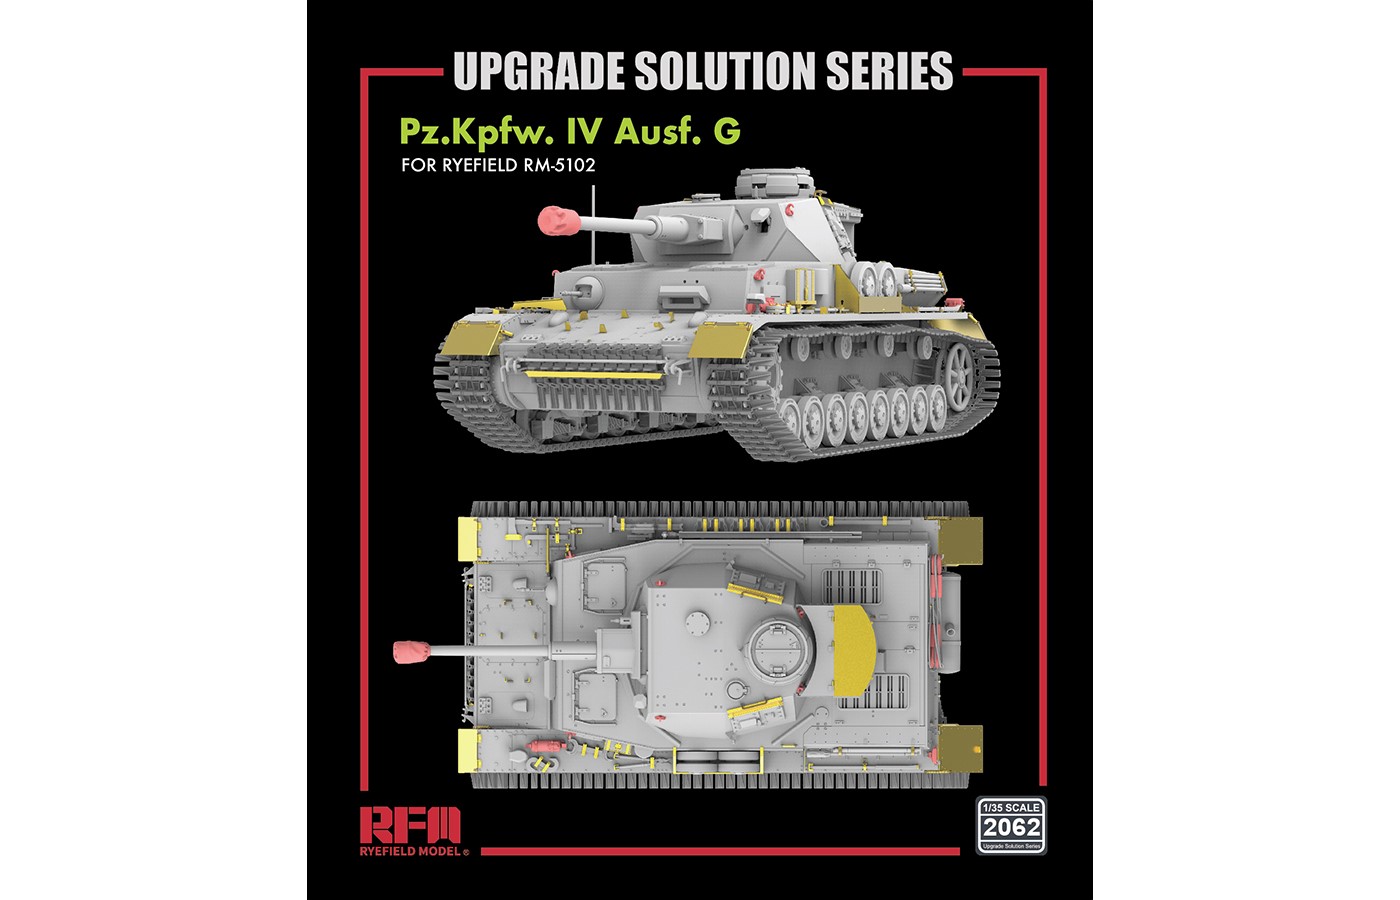 RM-2062 Pz.Kpfw. IV Ausf. G UPGRADE SOLUTION SERIES